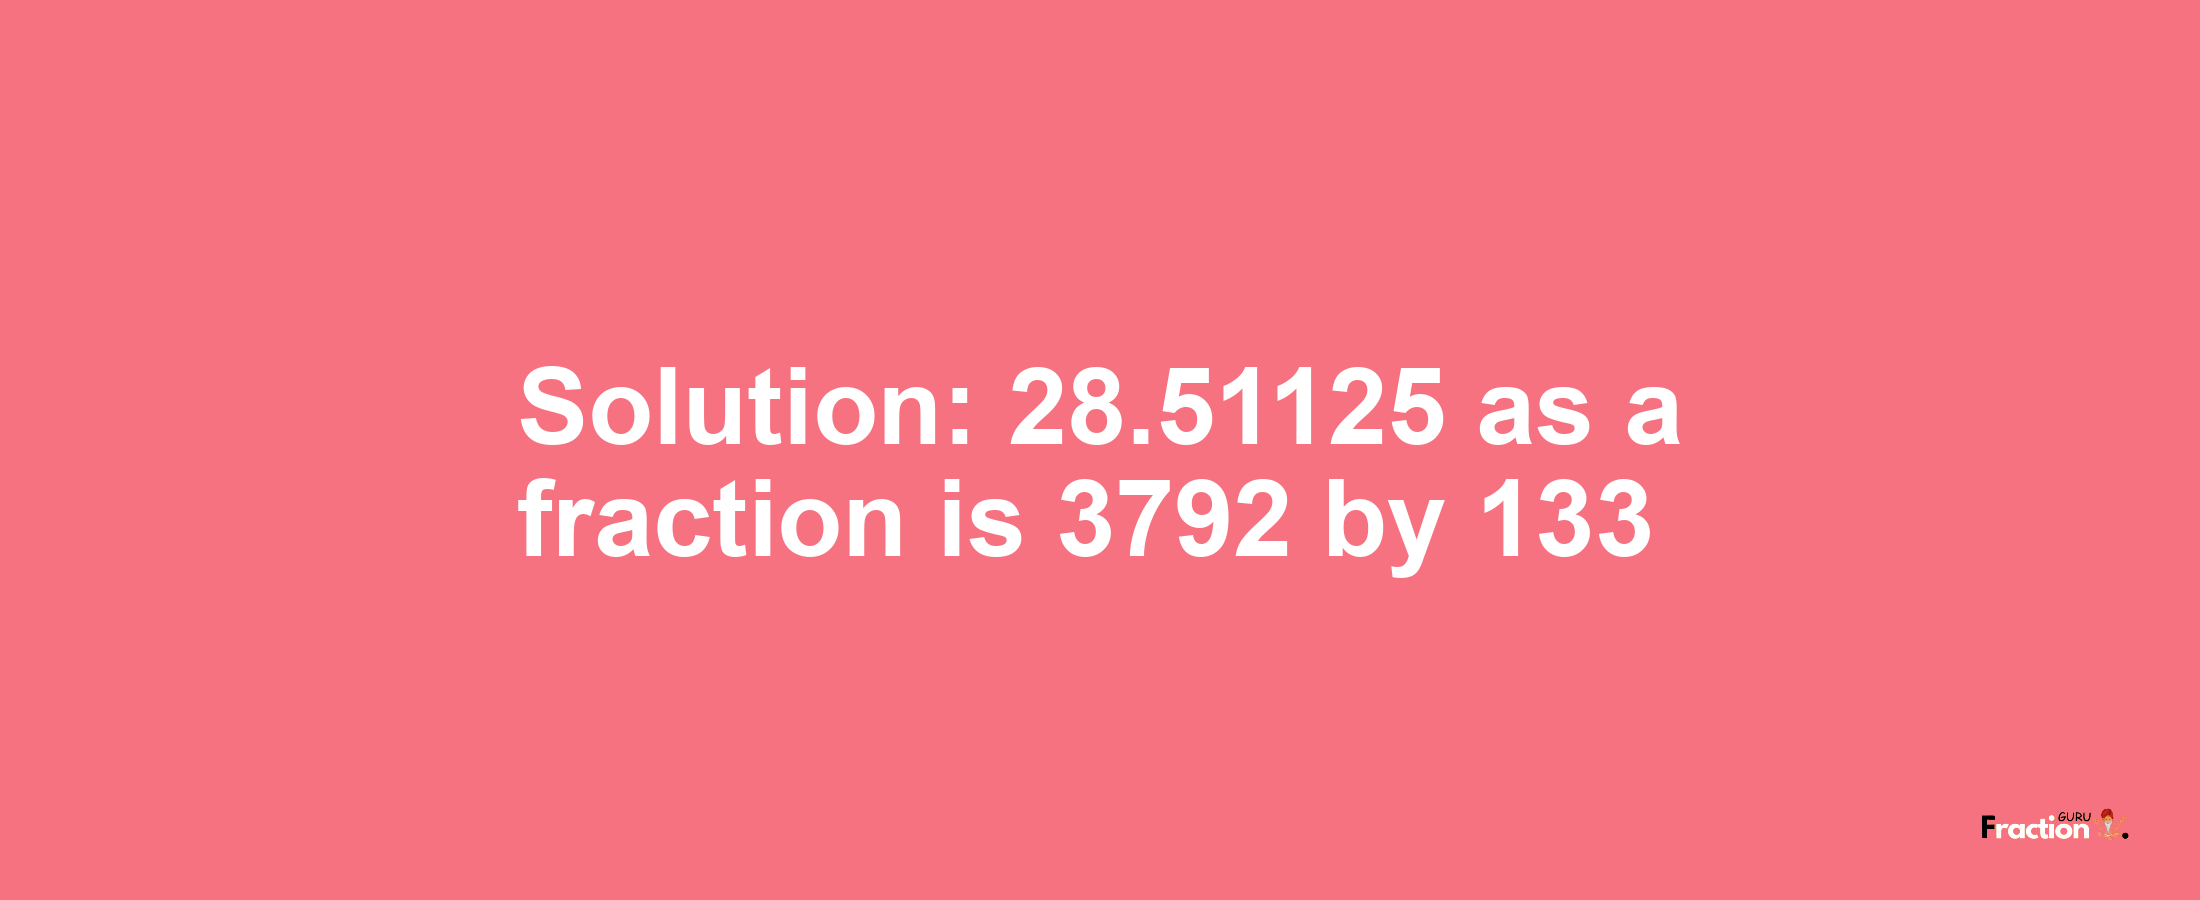 Solution:28.51125 as a fraction is 3792/133